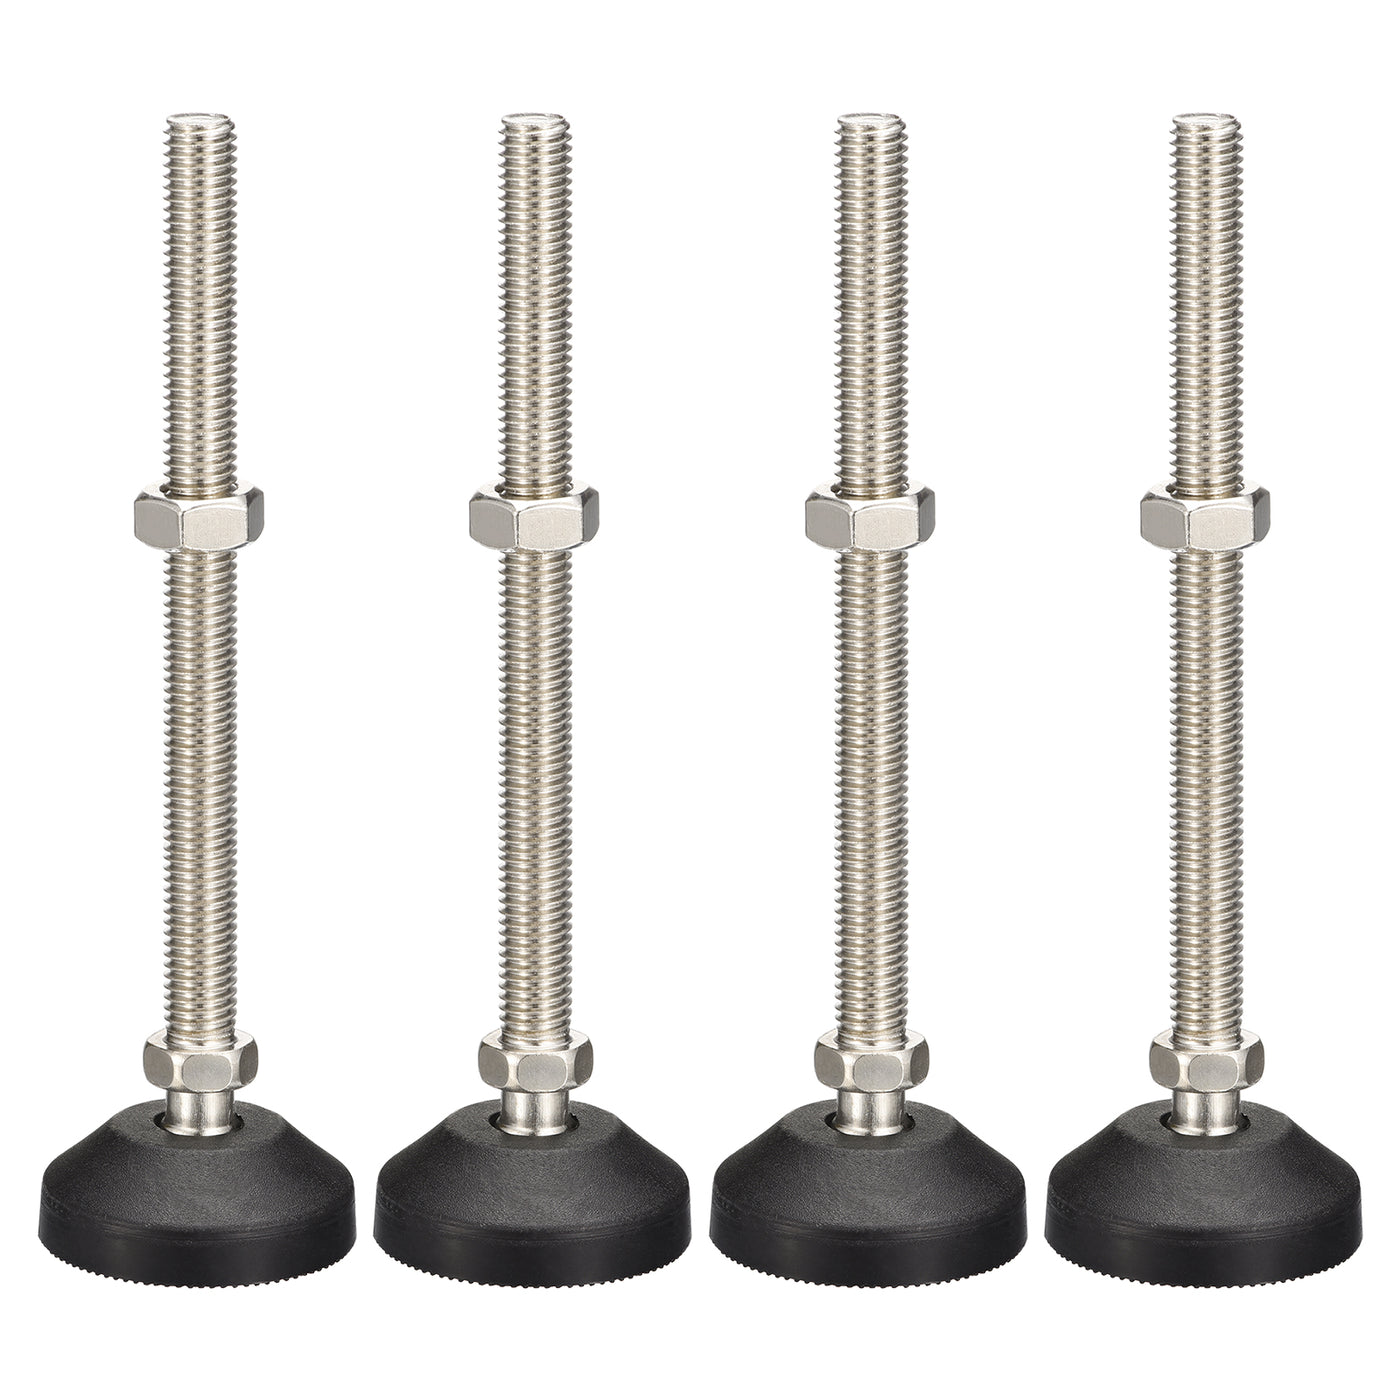 uxcell Uxcell Furniture Levelers, 4Pcs M12x150x50mm Nylon Universal Leveling Feet, Adjustable Swivel Table Feet for Furniture Workshop Machines Machinery Equipment